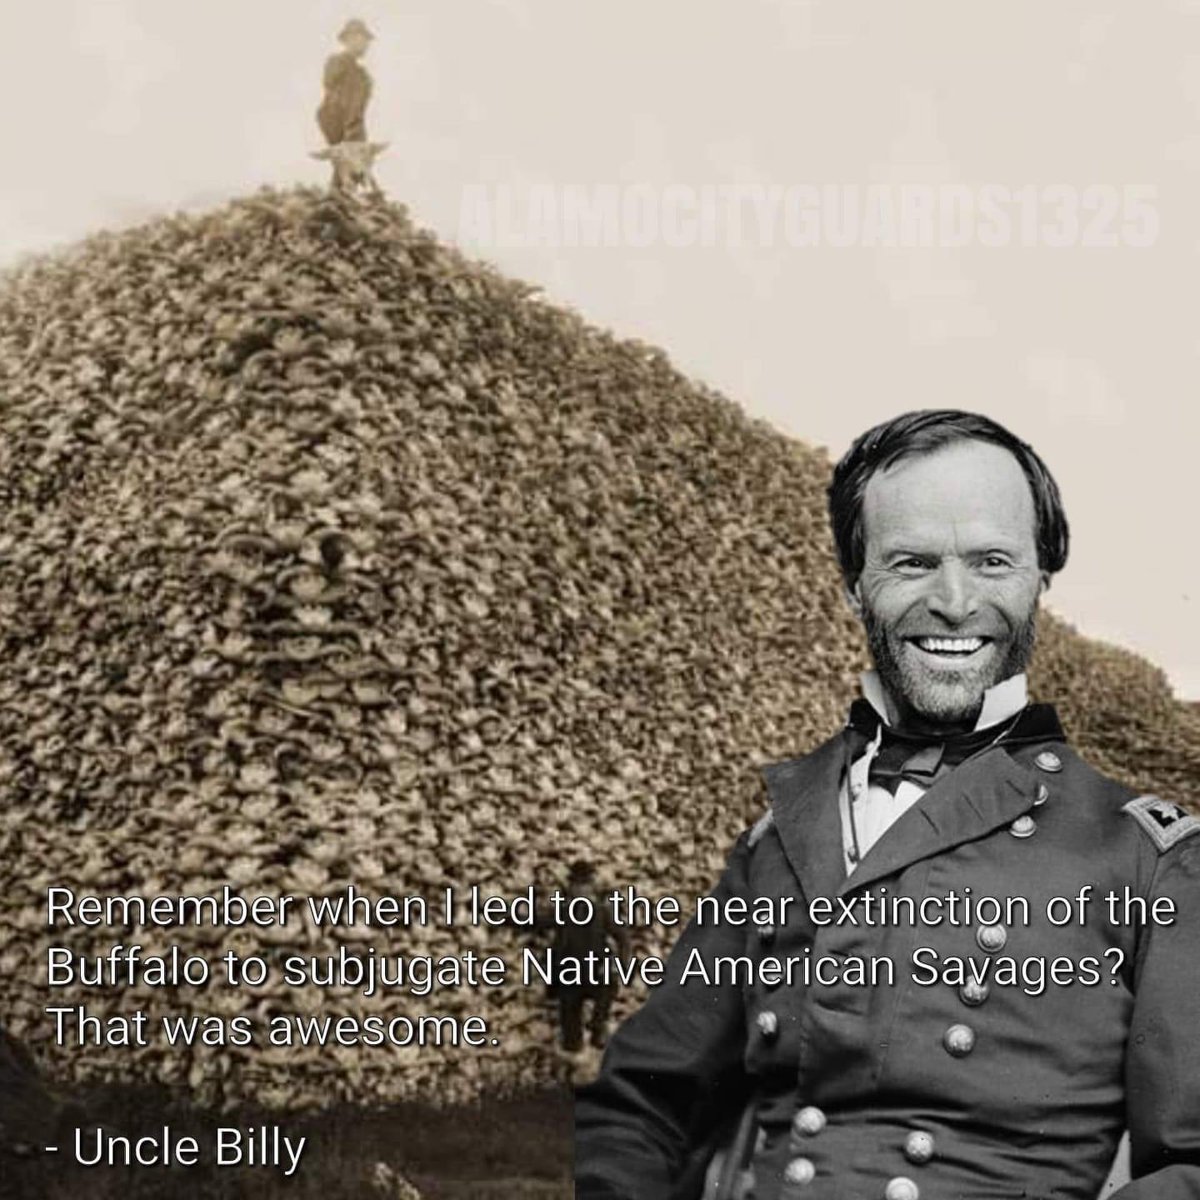 The majority of the Northern people didn’t care about minorities at all. General Sherman, as commander over the forces against the Indians, wrote a letter to President Grant expressing his views: “We must act with vindictive earnestness against the Sioux, even to their…